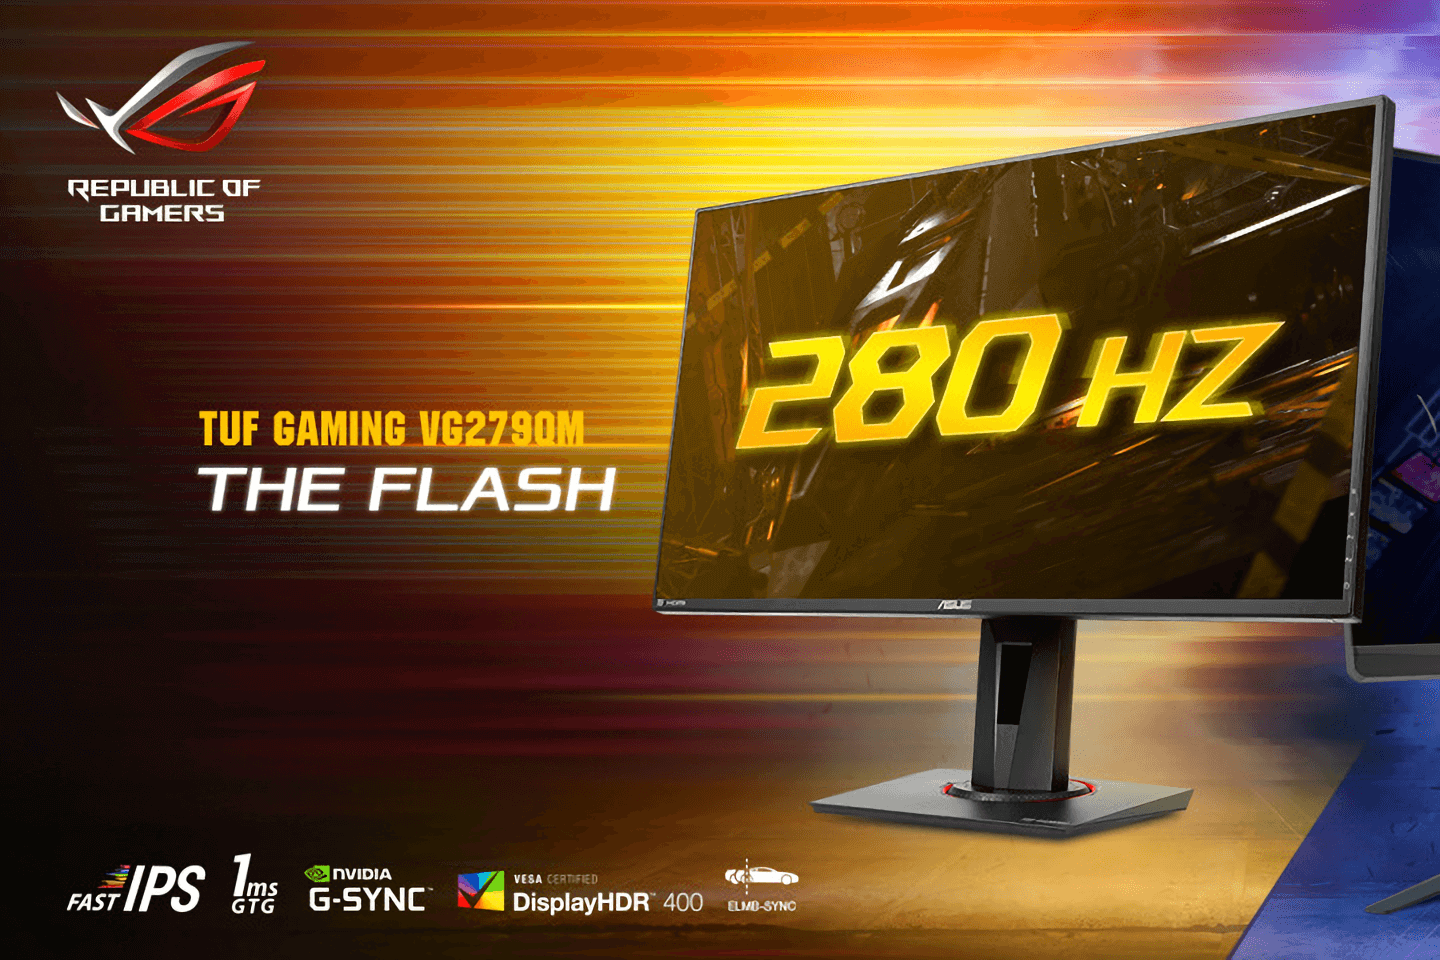 Asus is selling a monitor with 280Hz support in Taiwan, store page reveals